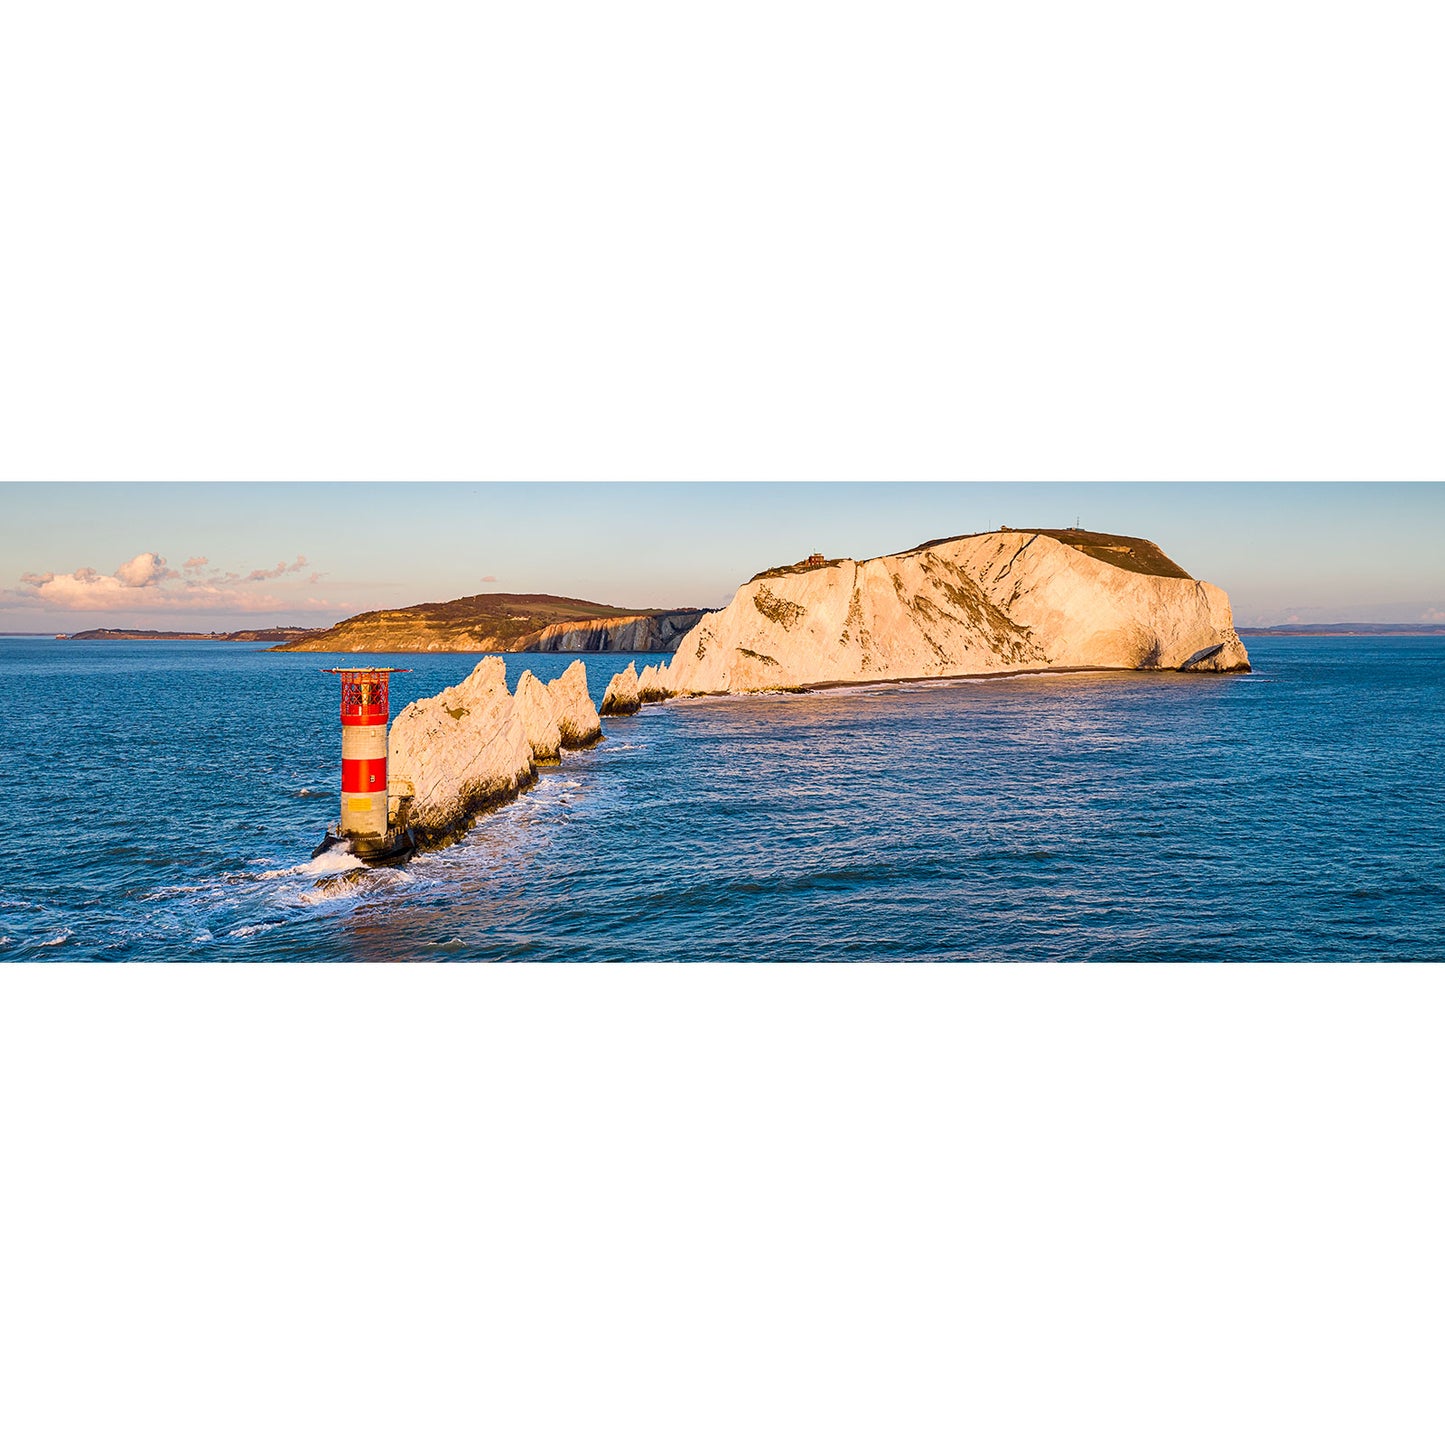 The Needles - Available Light Photography